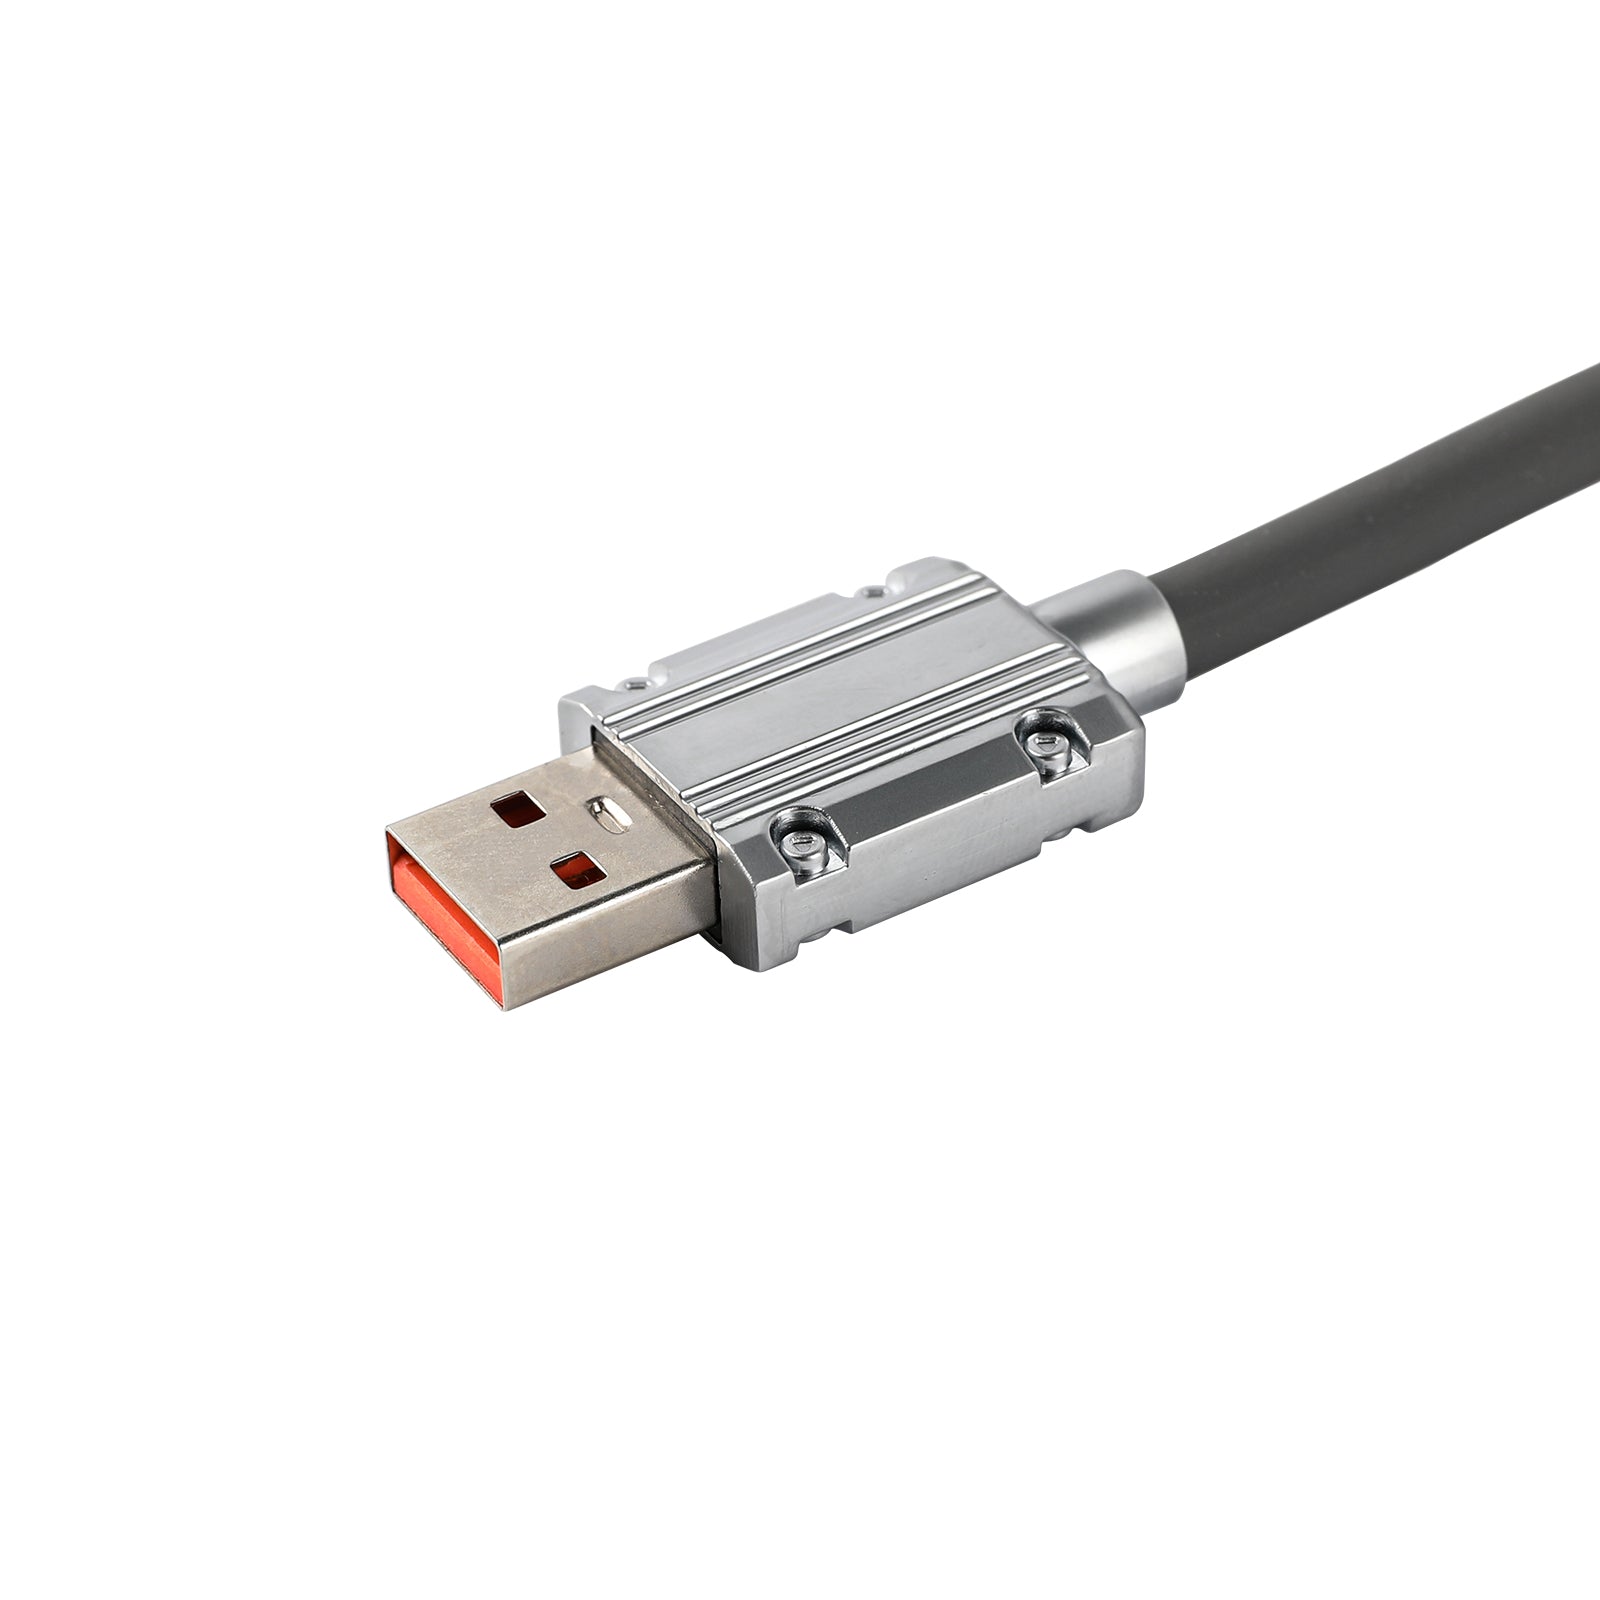 EPOMAKER RT100 Cable